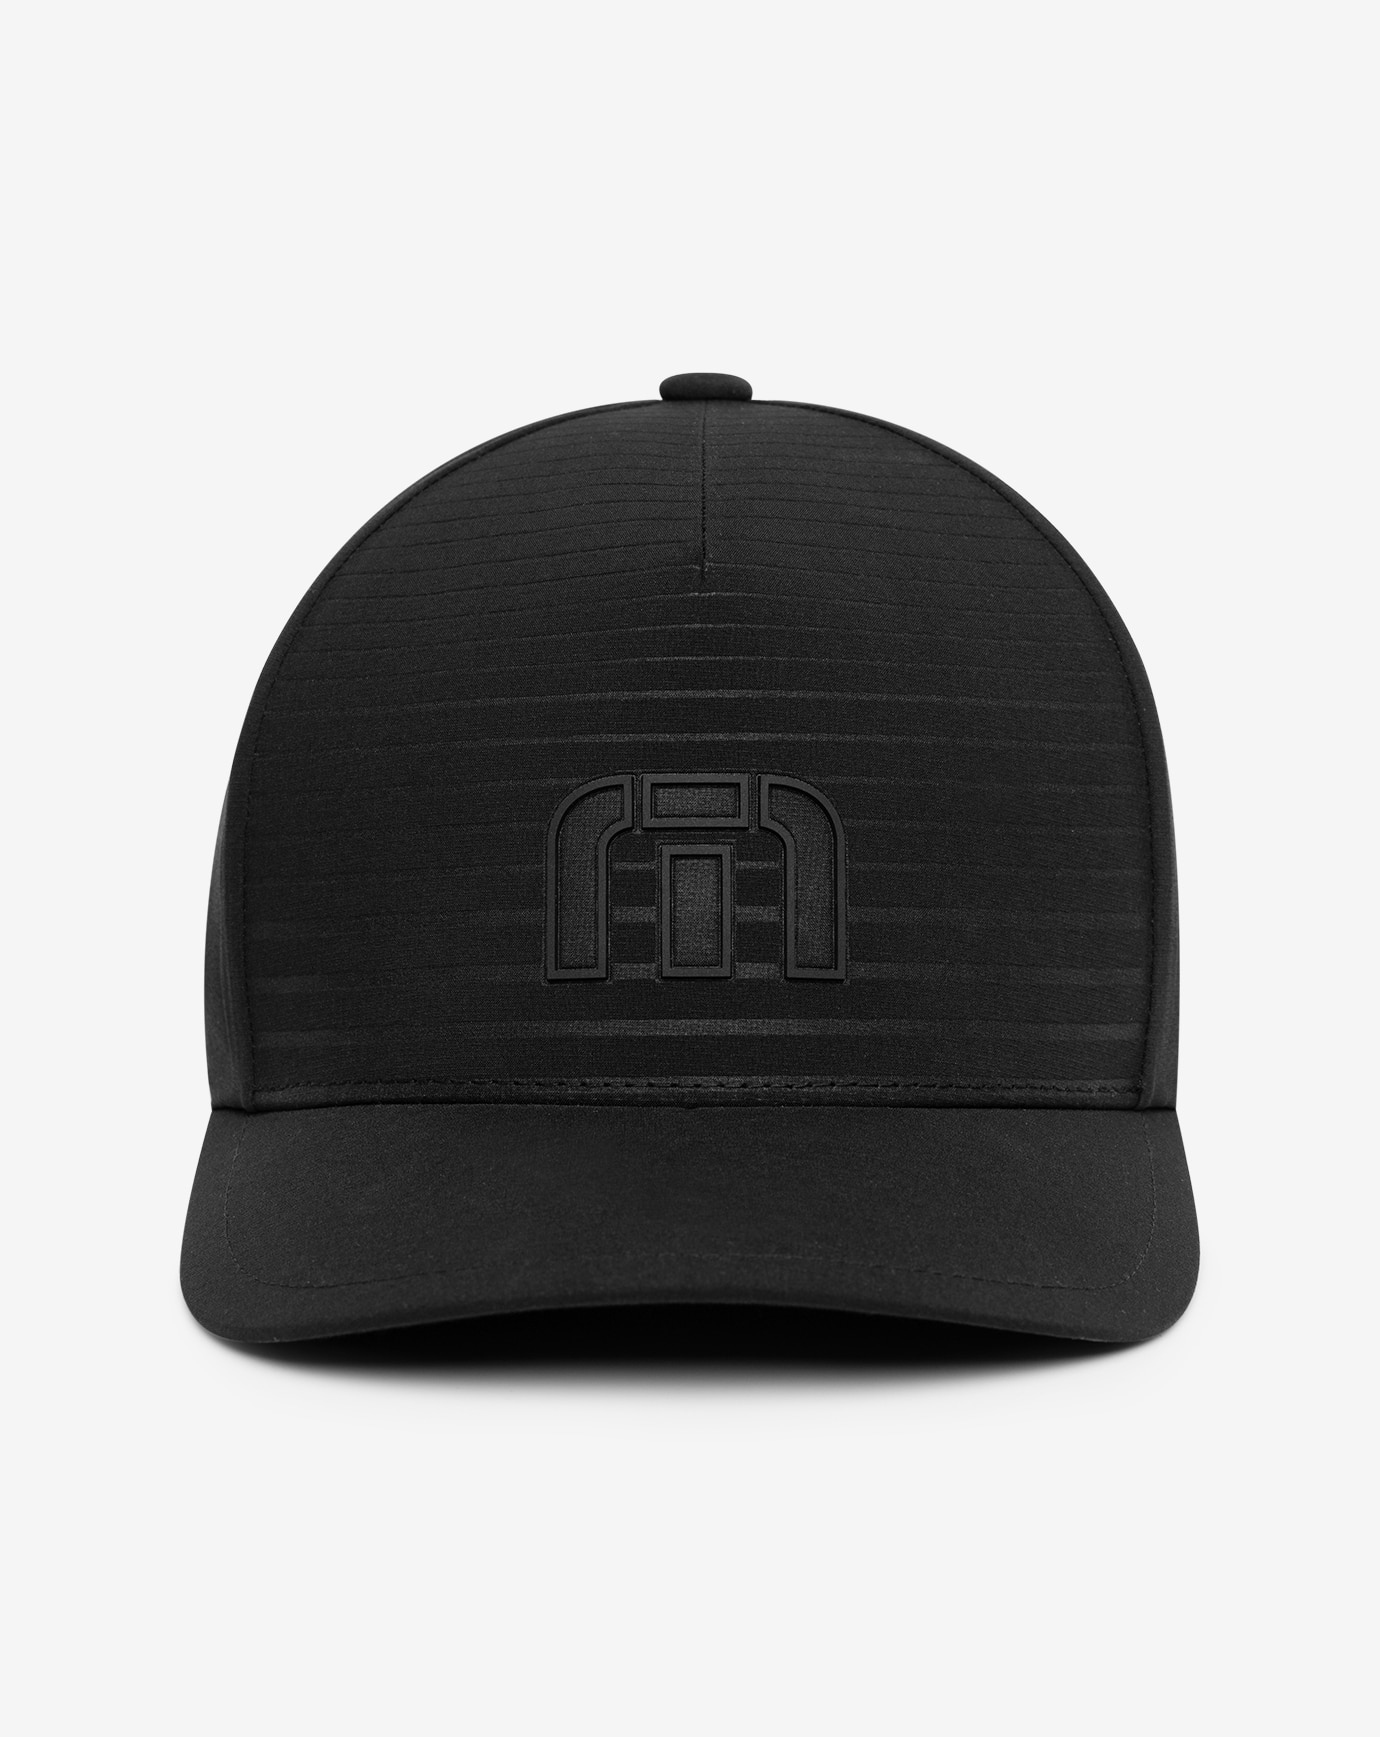 TAHONA HEATER TECH FITTED HAT Image Thumbnail 1